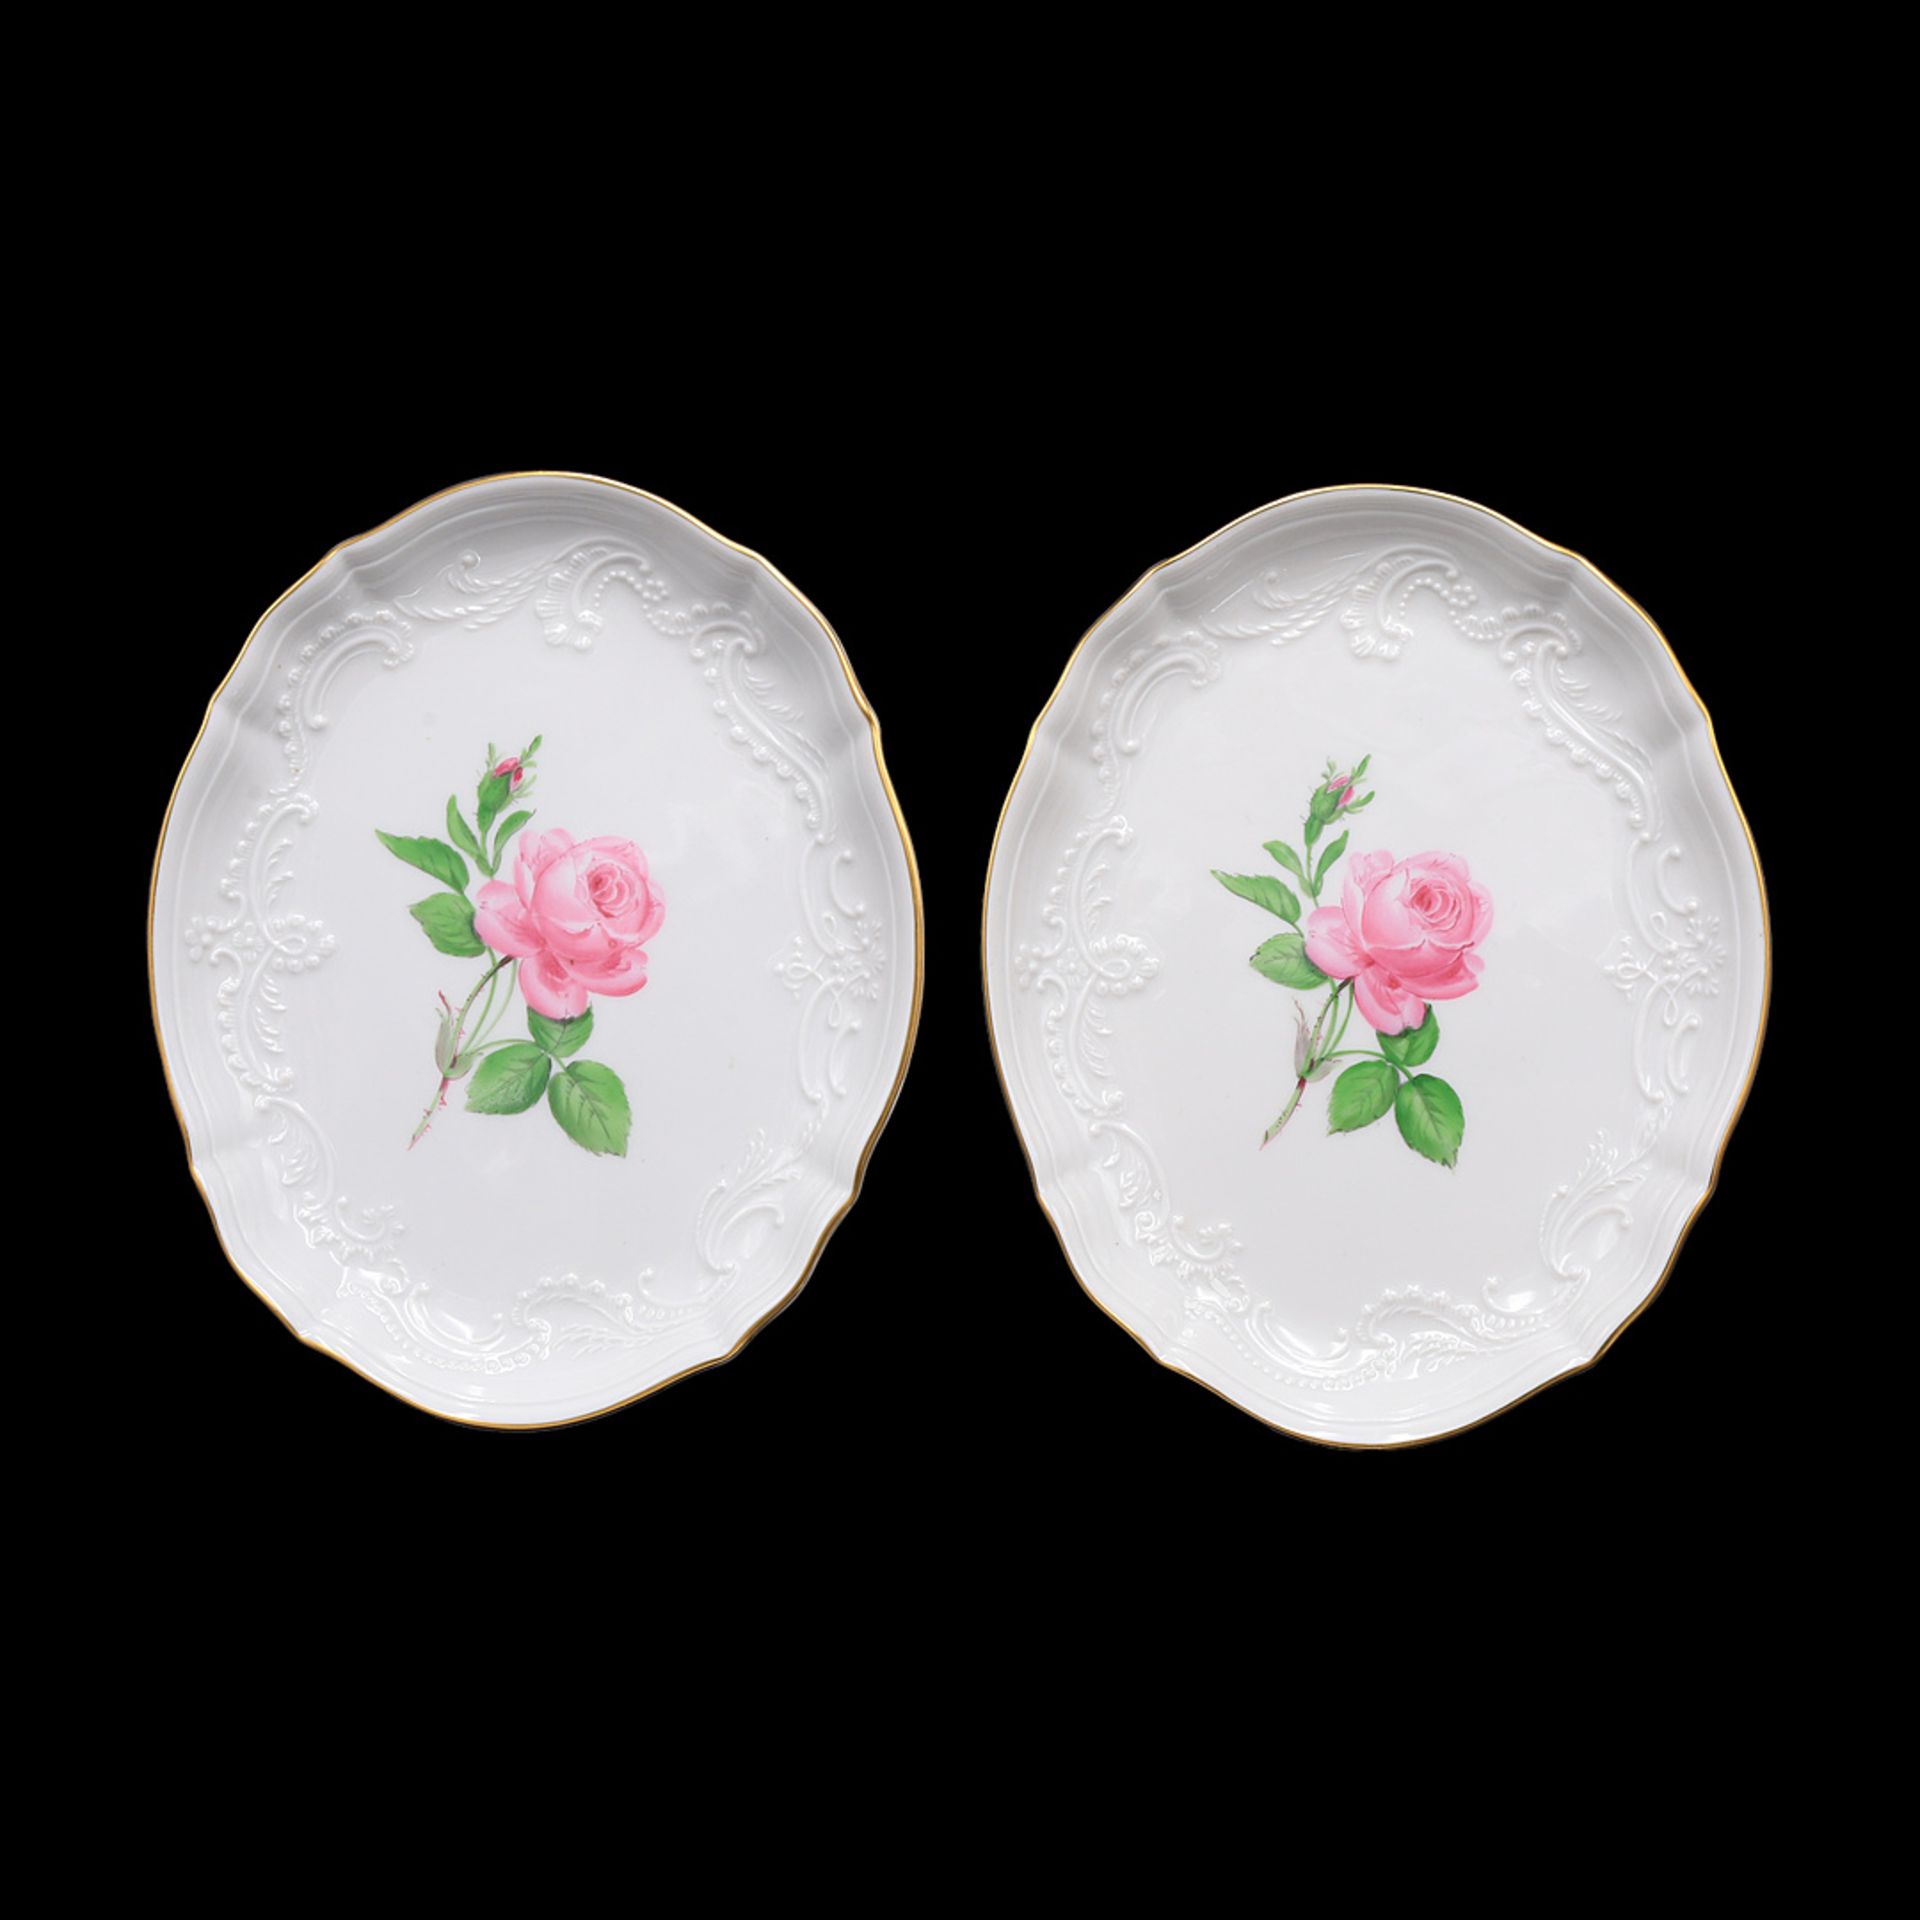 Two Meissen bowls with red roses - Image 2 of 3